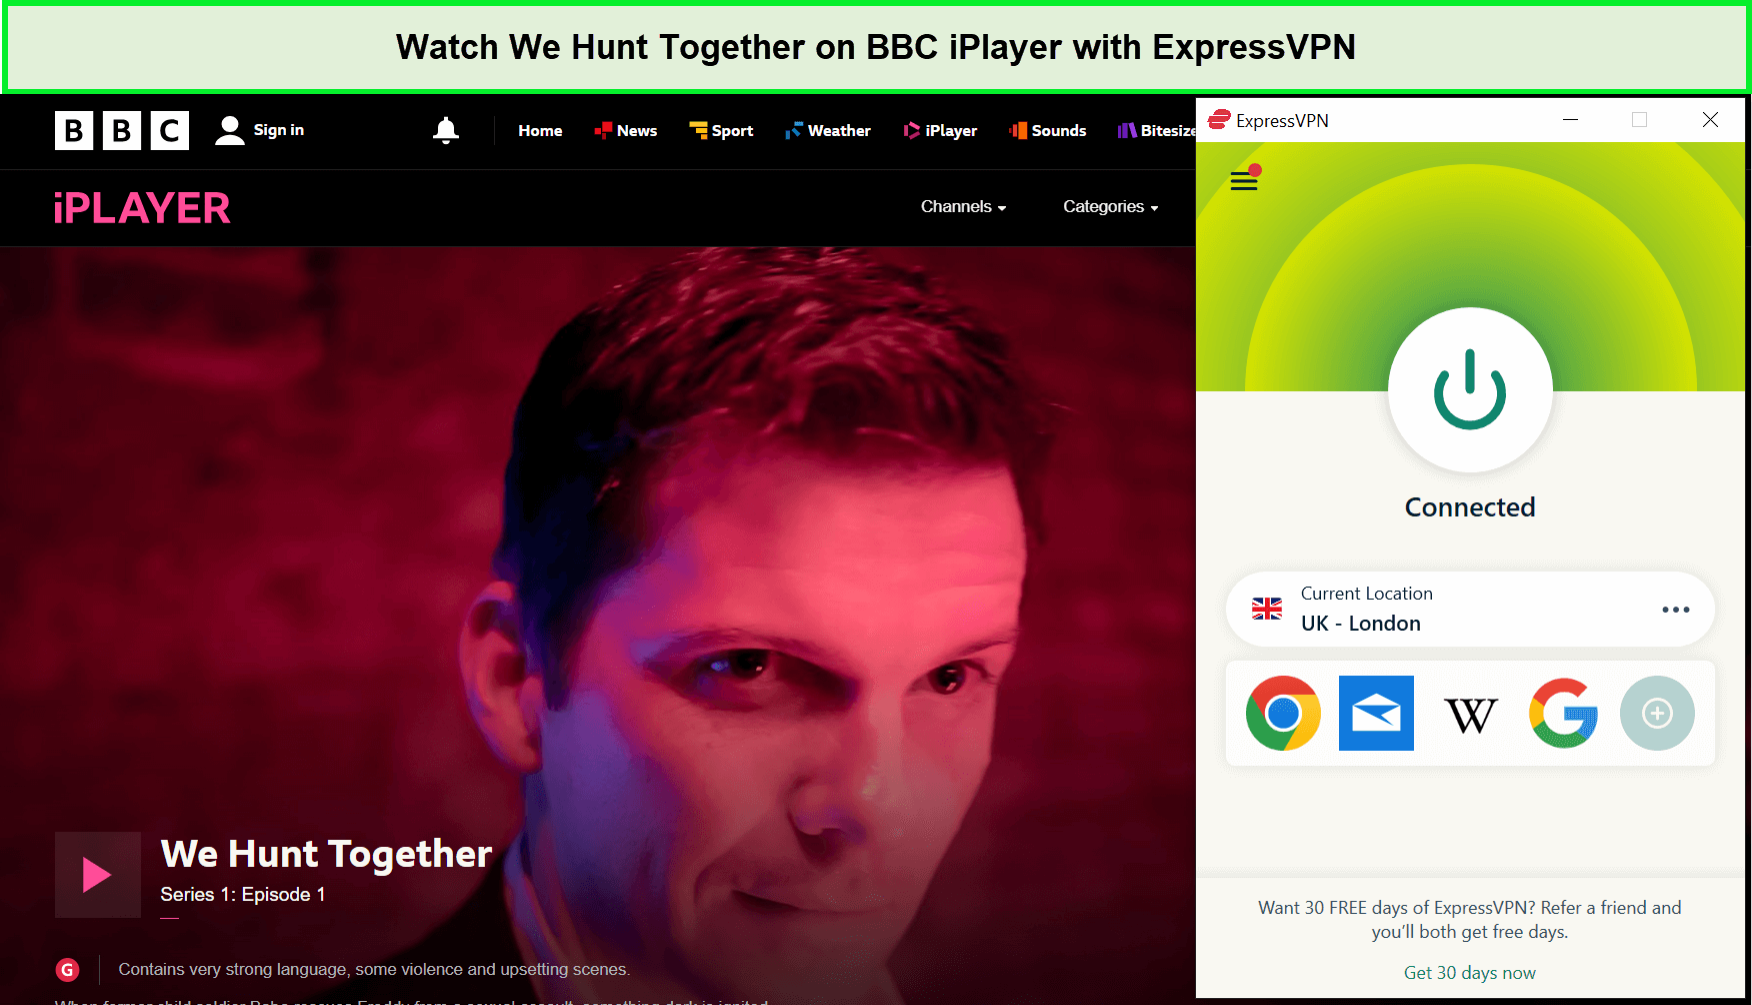 Watch-We-Hunt-Together-in-Spainon-BBC-iPlayer-with-ExpressVPN